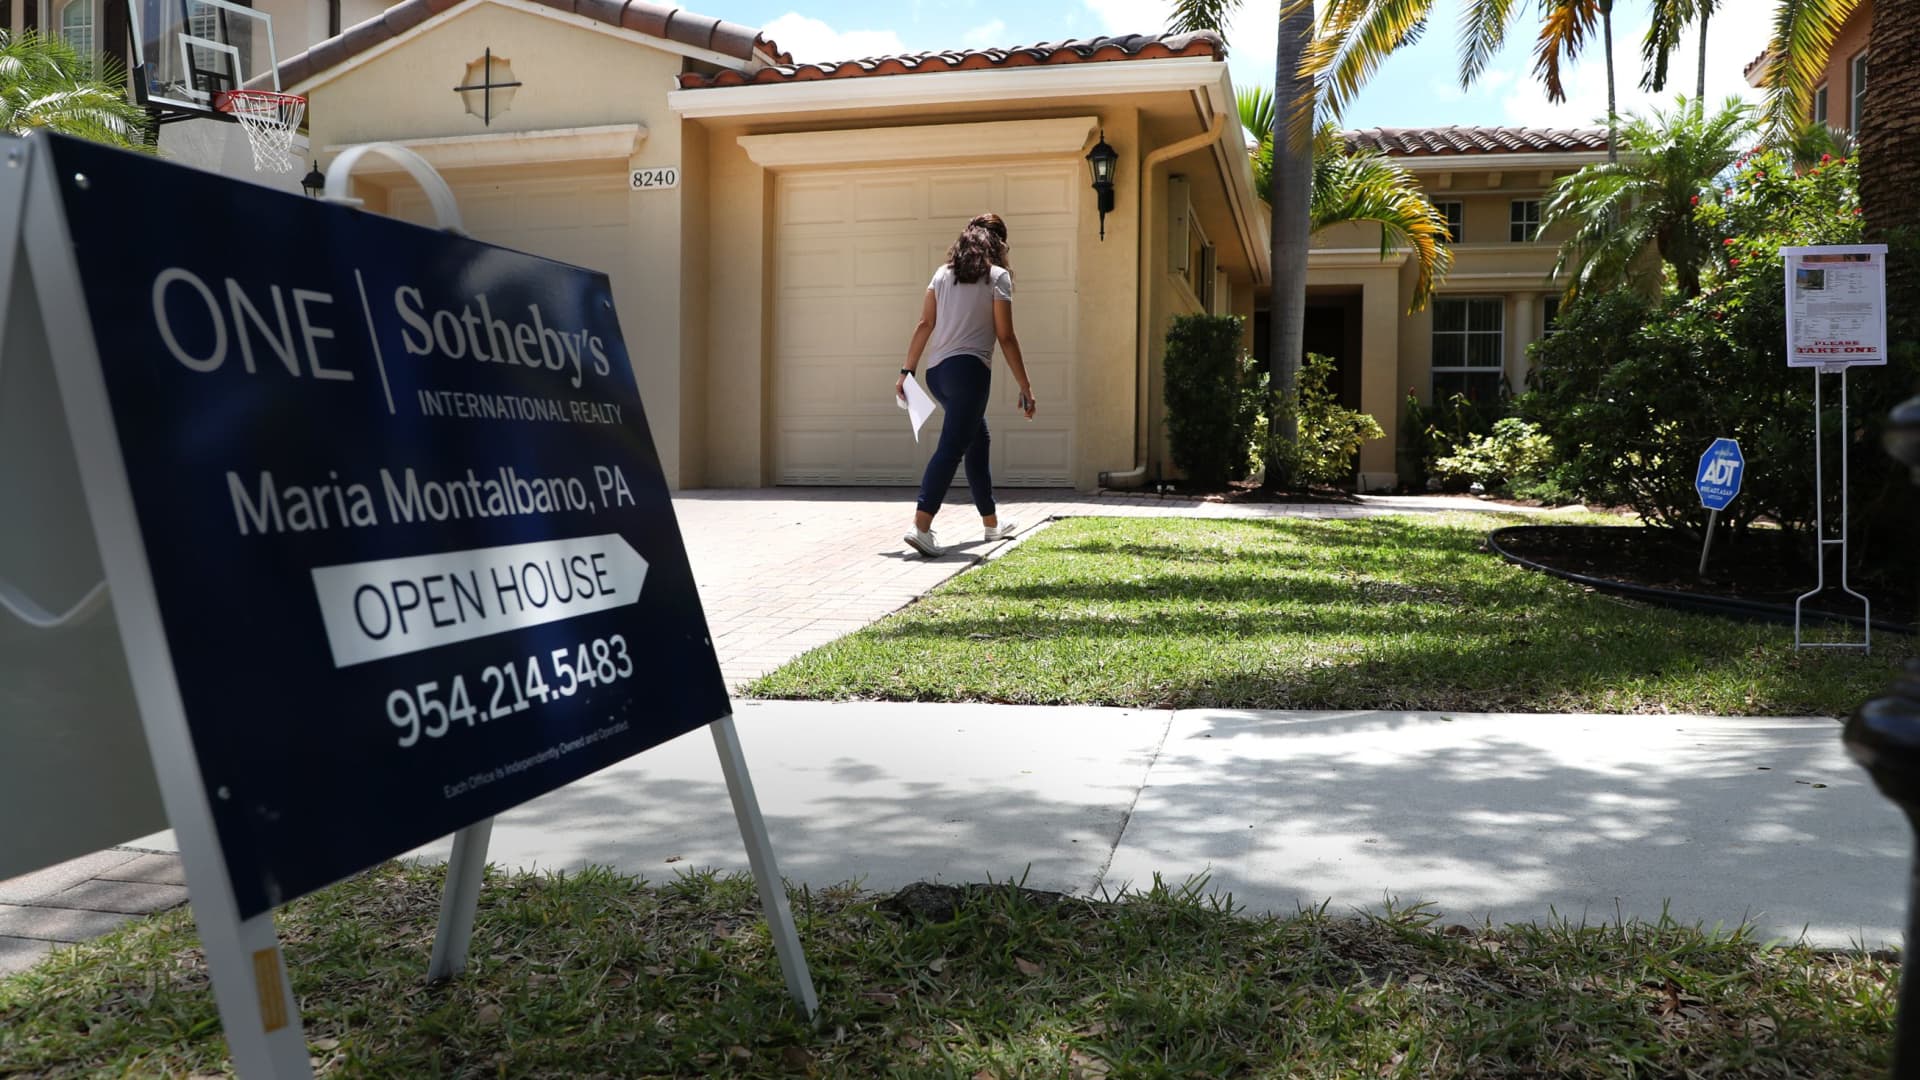 Residence worth declines could also be over, S&P Case-Shiller says